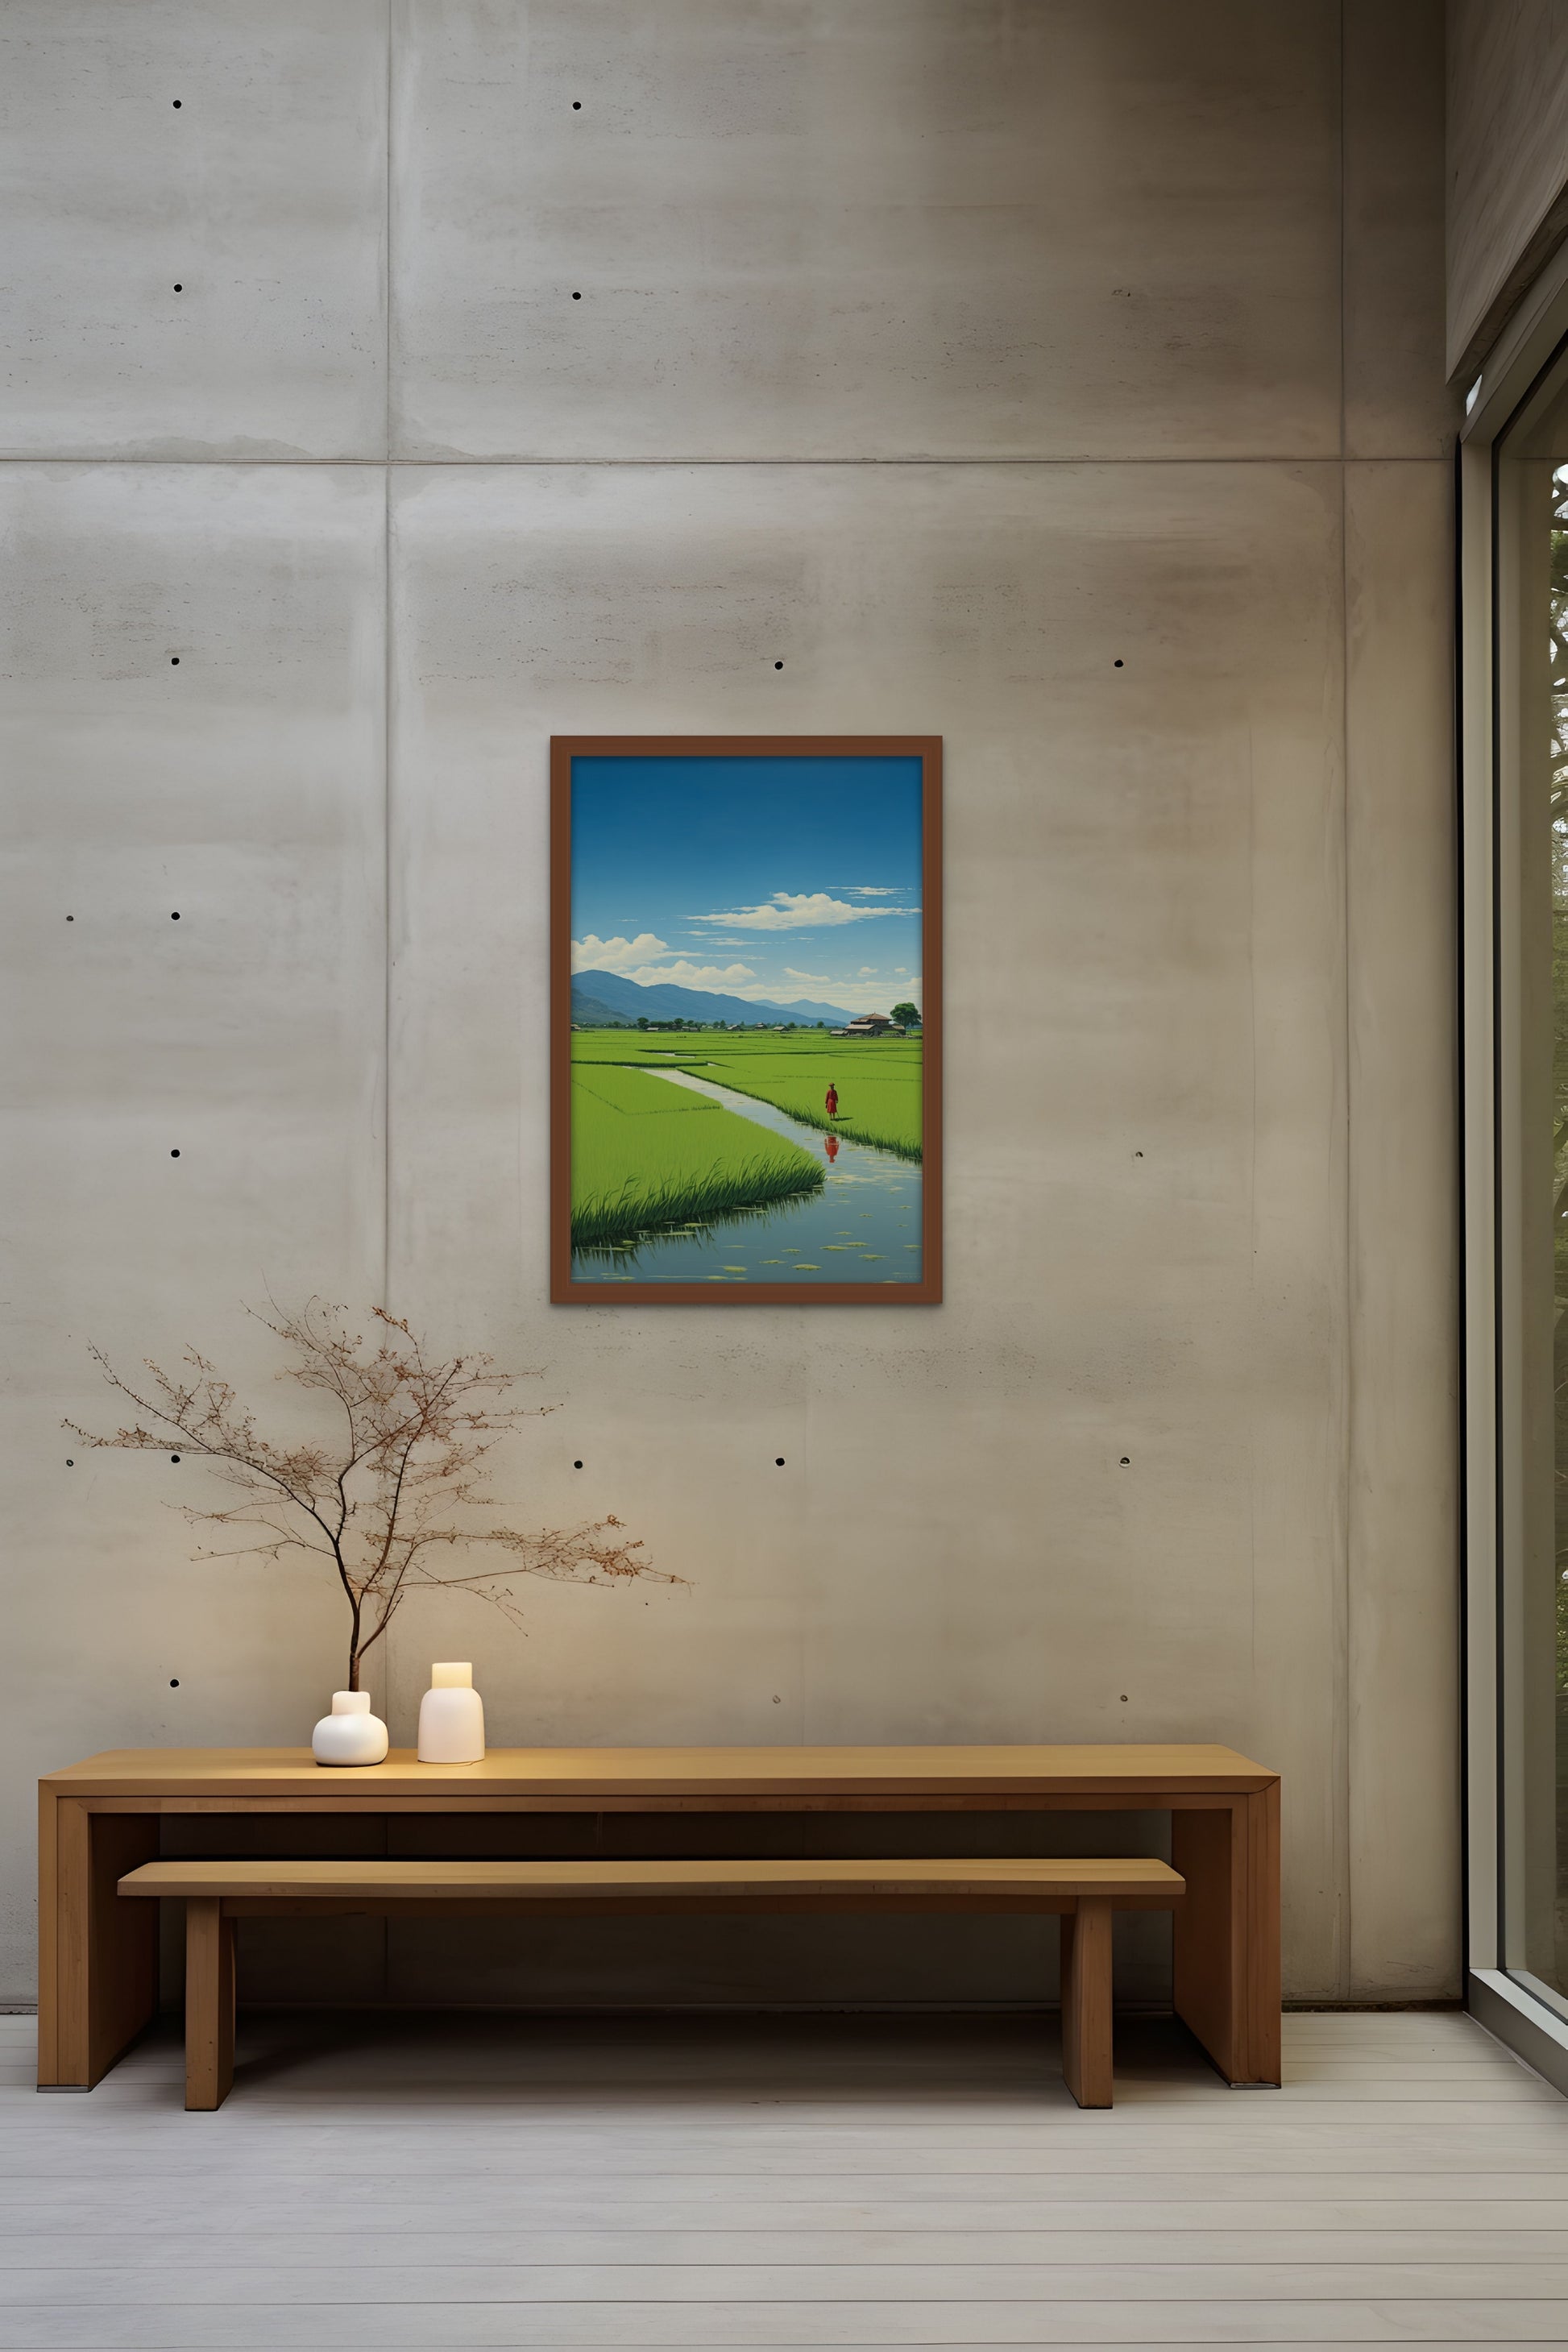 Painting of a rural landscape on a concrete wall above a bench with a decorative plant and candles.